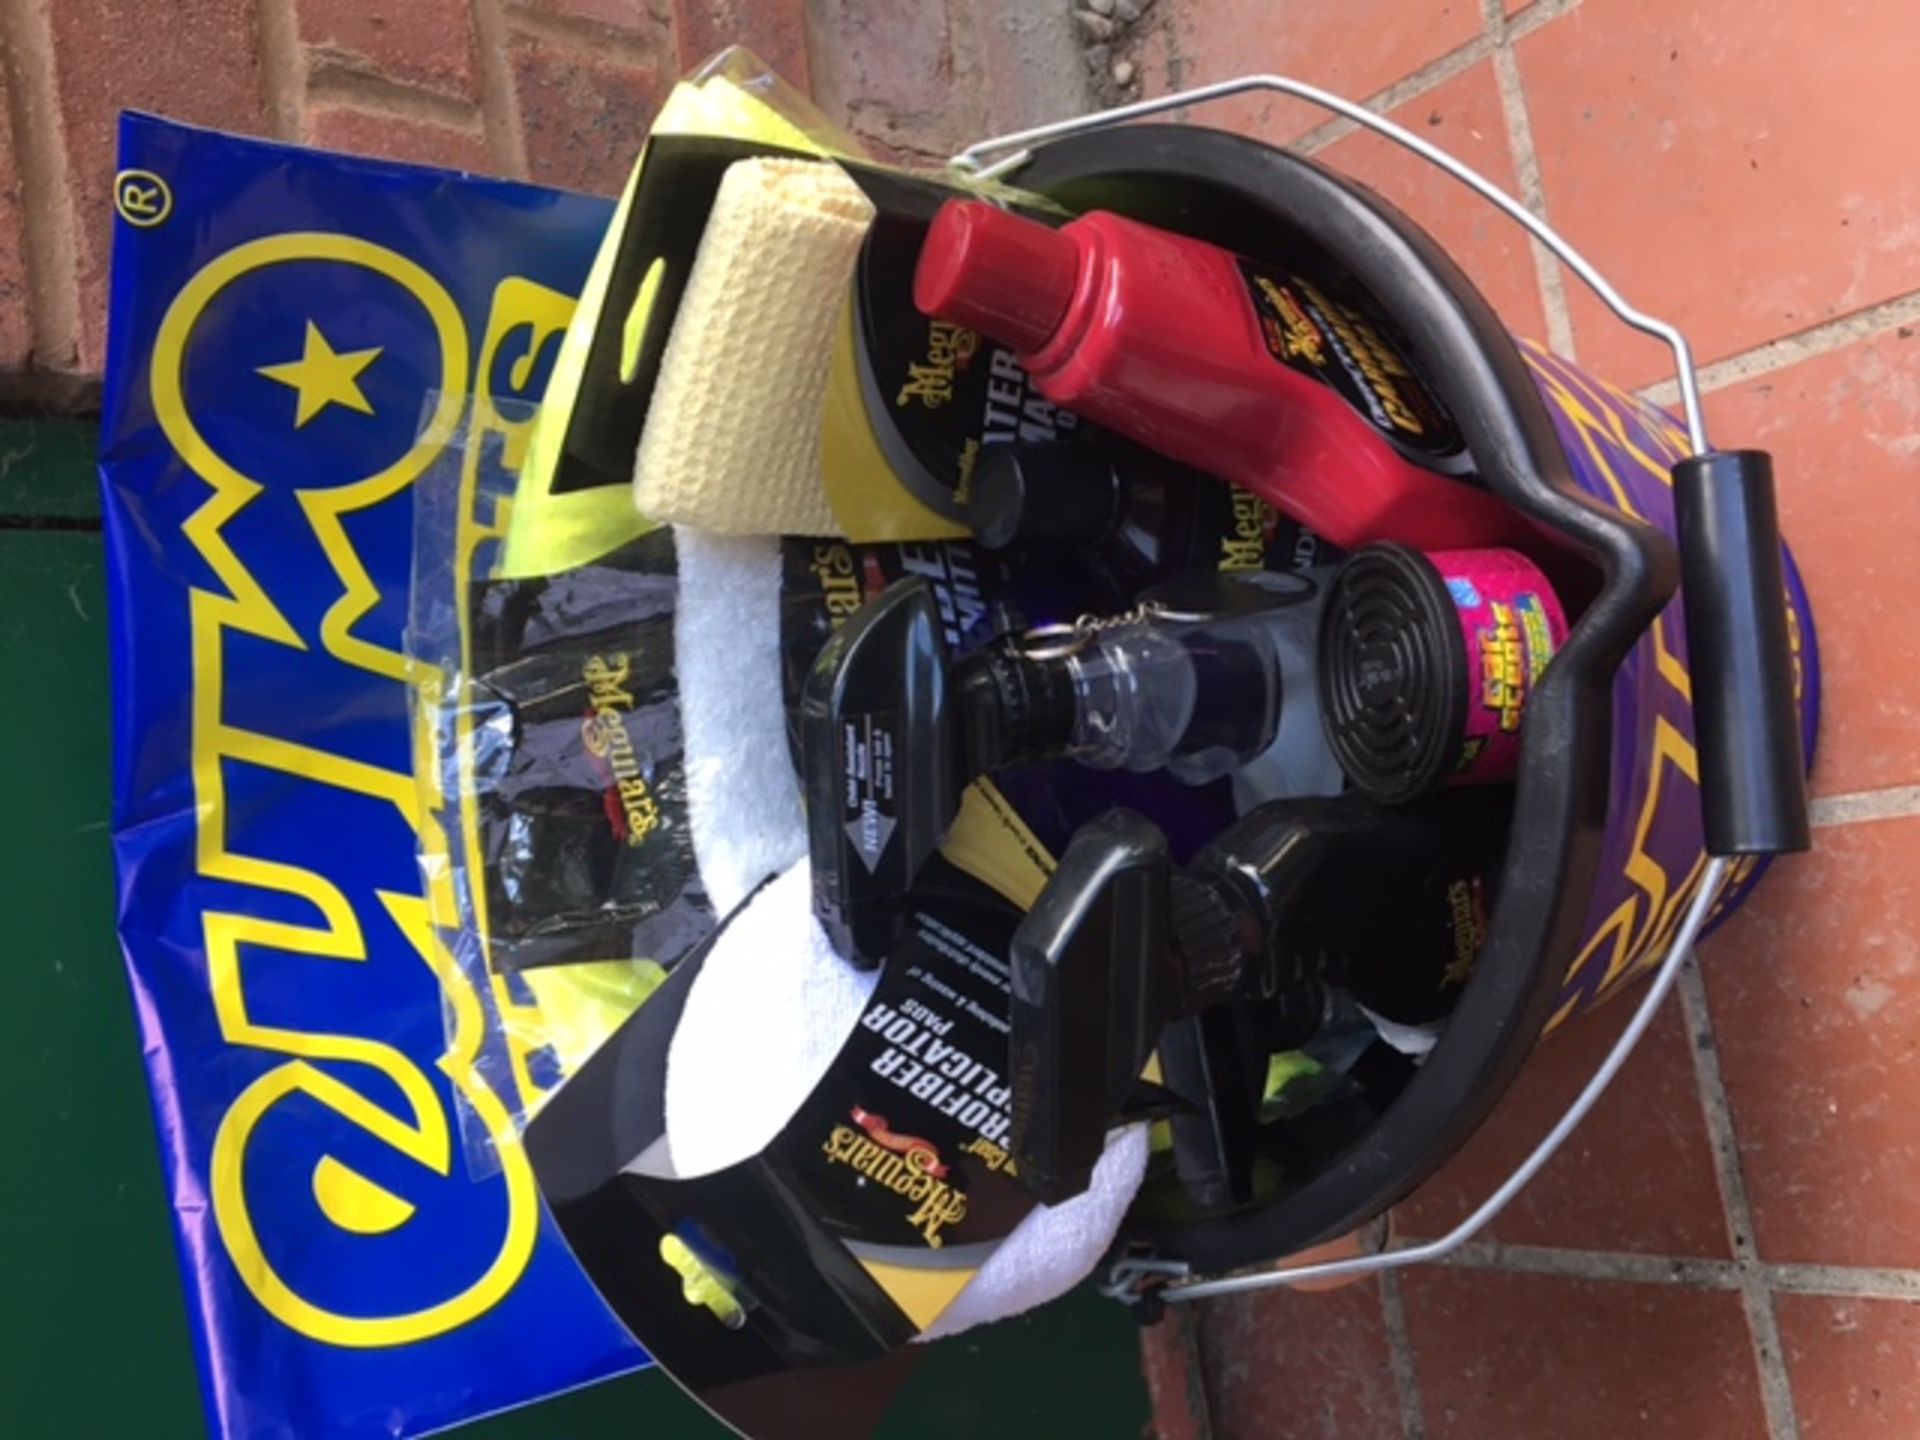 Car cleaning bucket: Meguiars mega cleaning bucket. Worth £130.00, consists of - Glass cleaner, Tyre